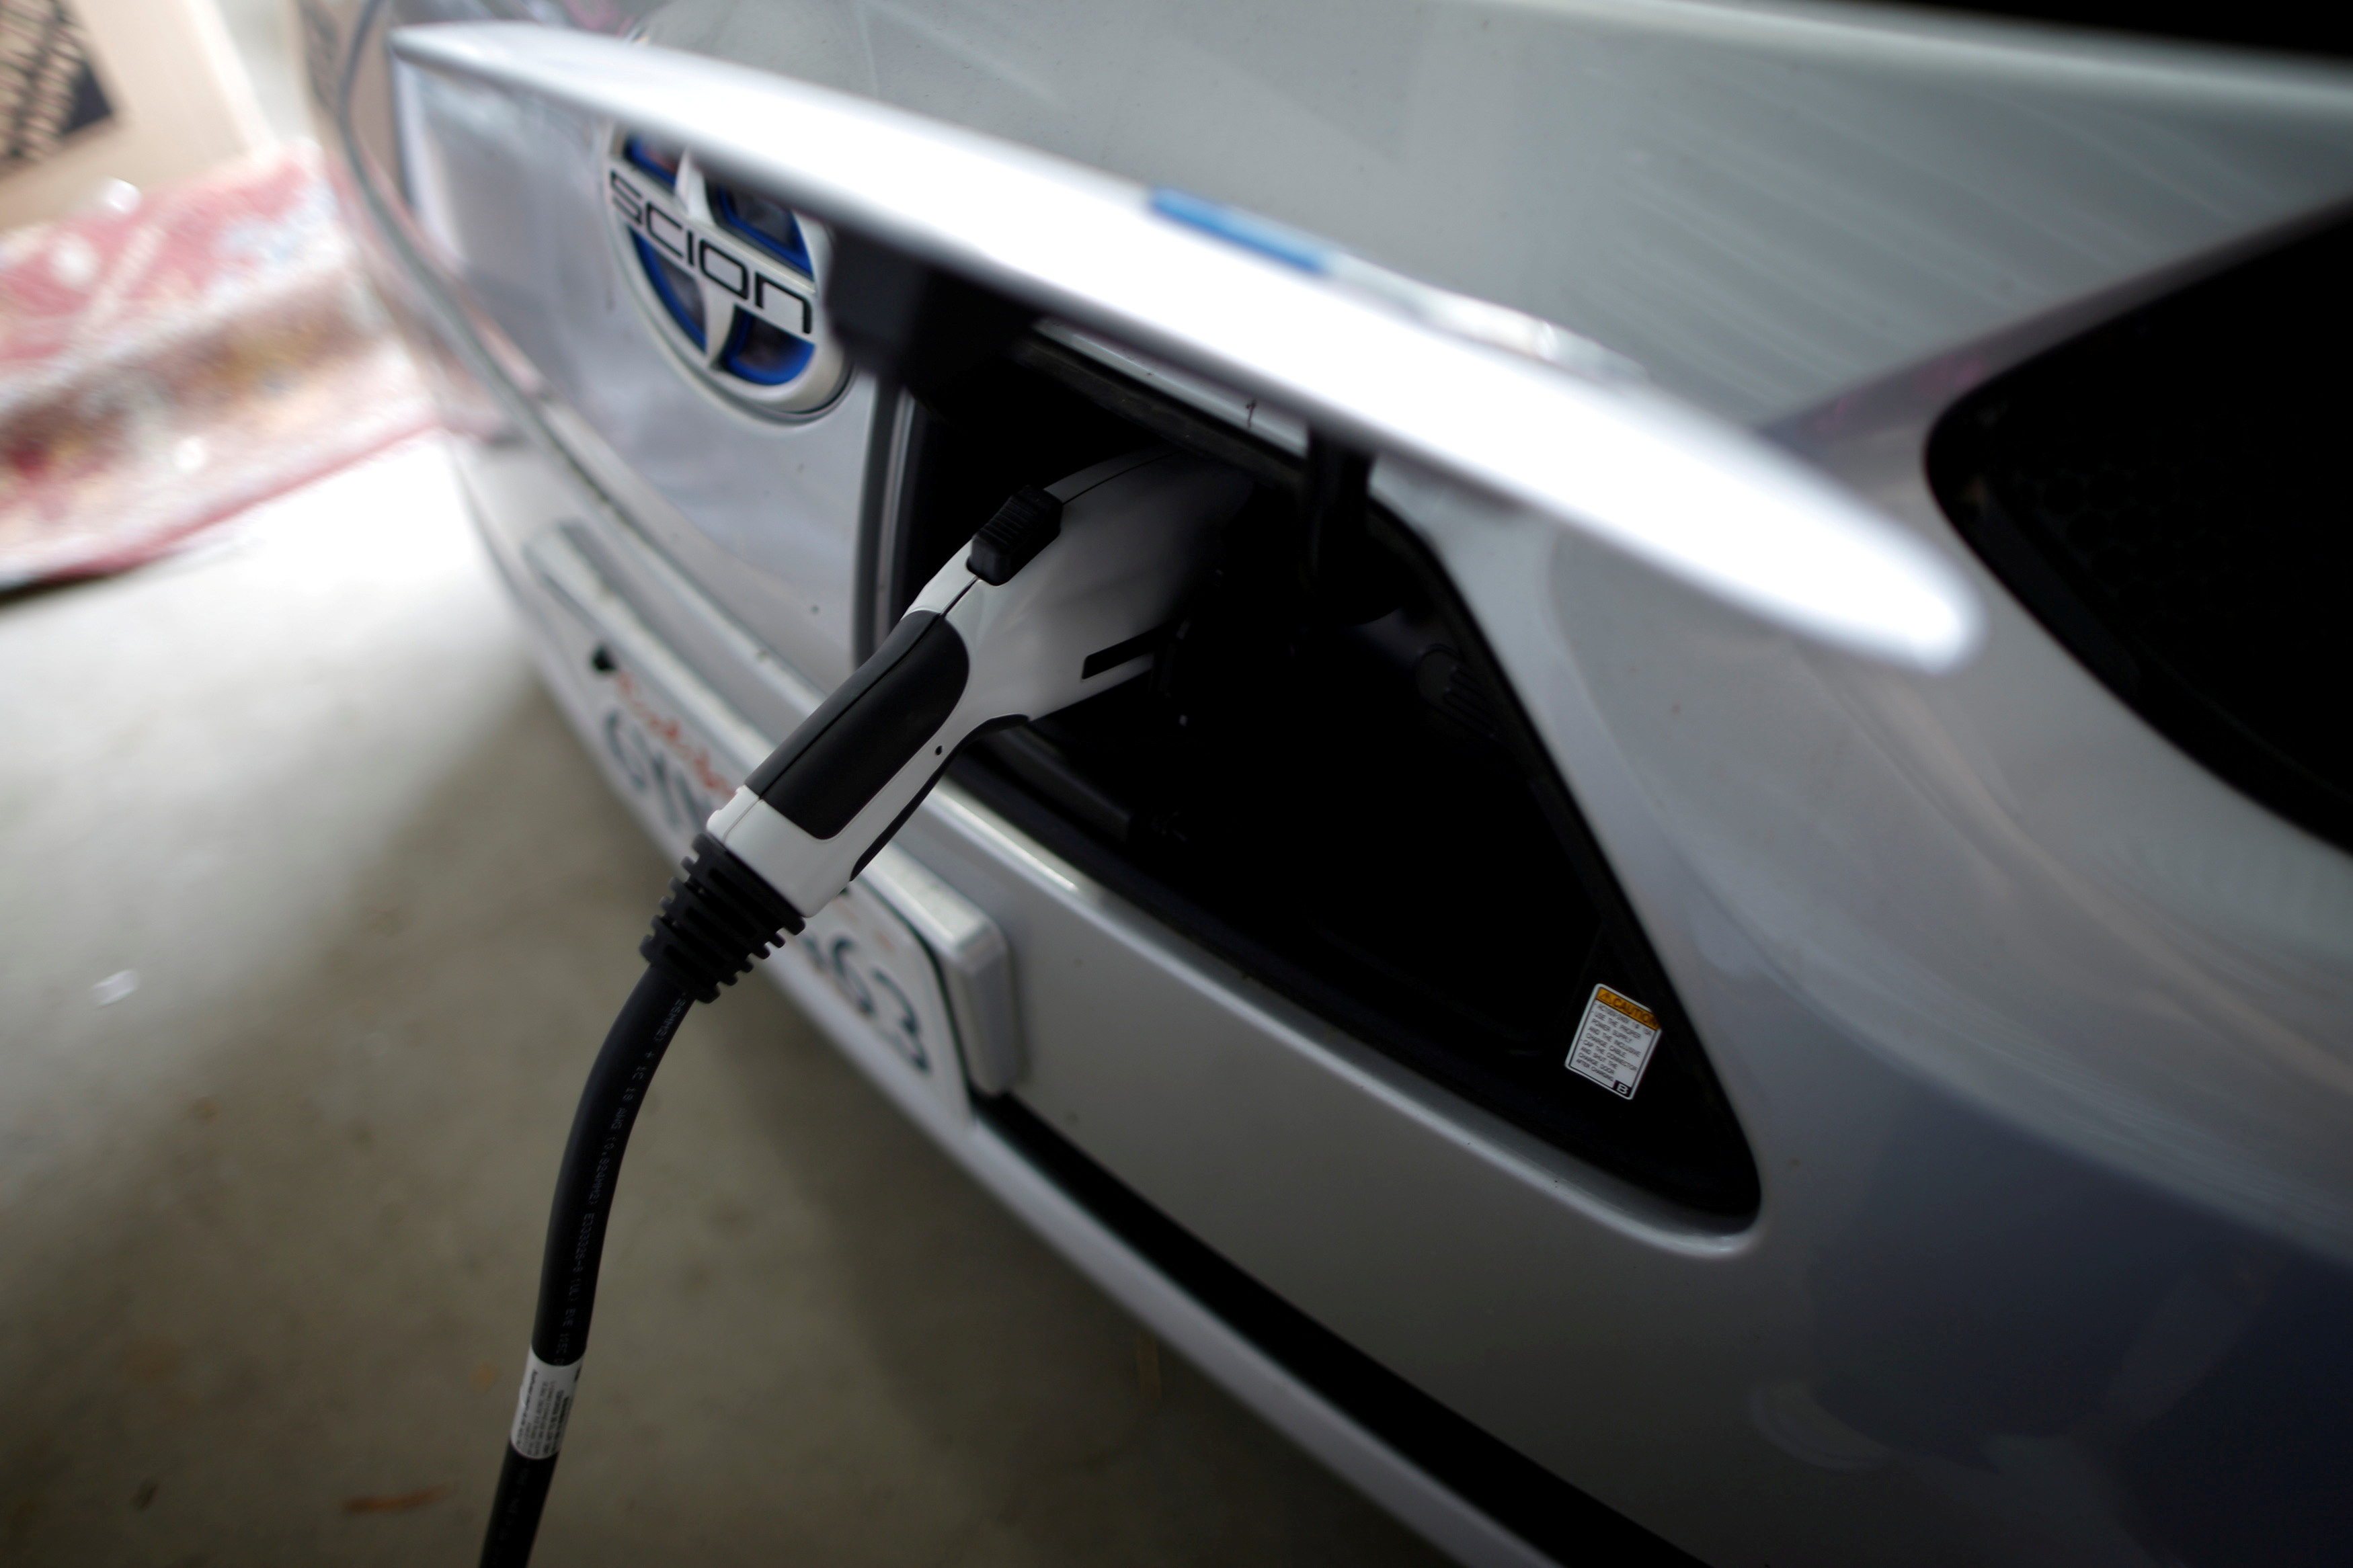 Computer science professor's electric car is plugged in in her garage in Irvine, California January 26, 2015. REUTERS/Lucy Nicholson